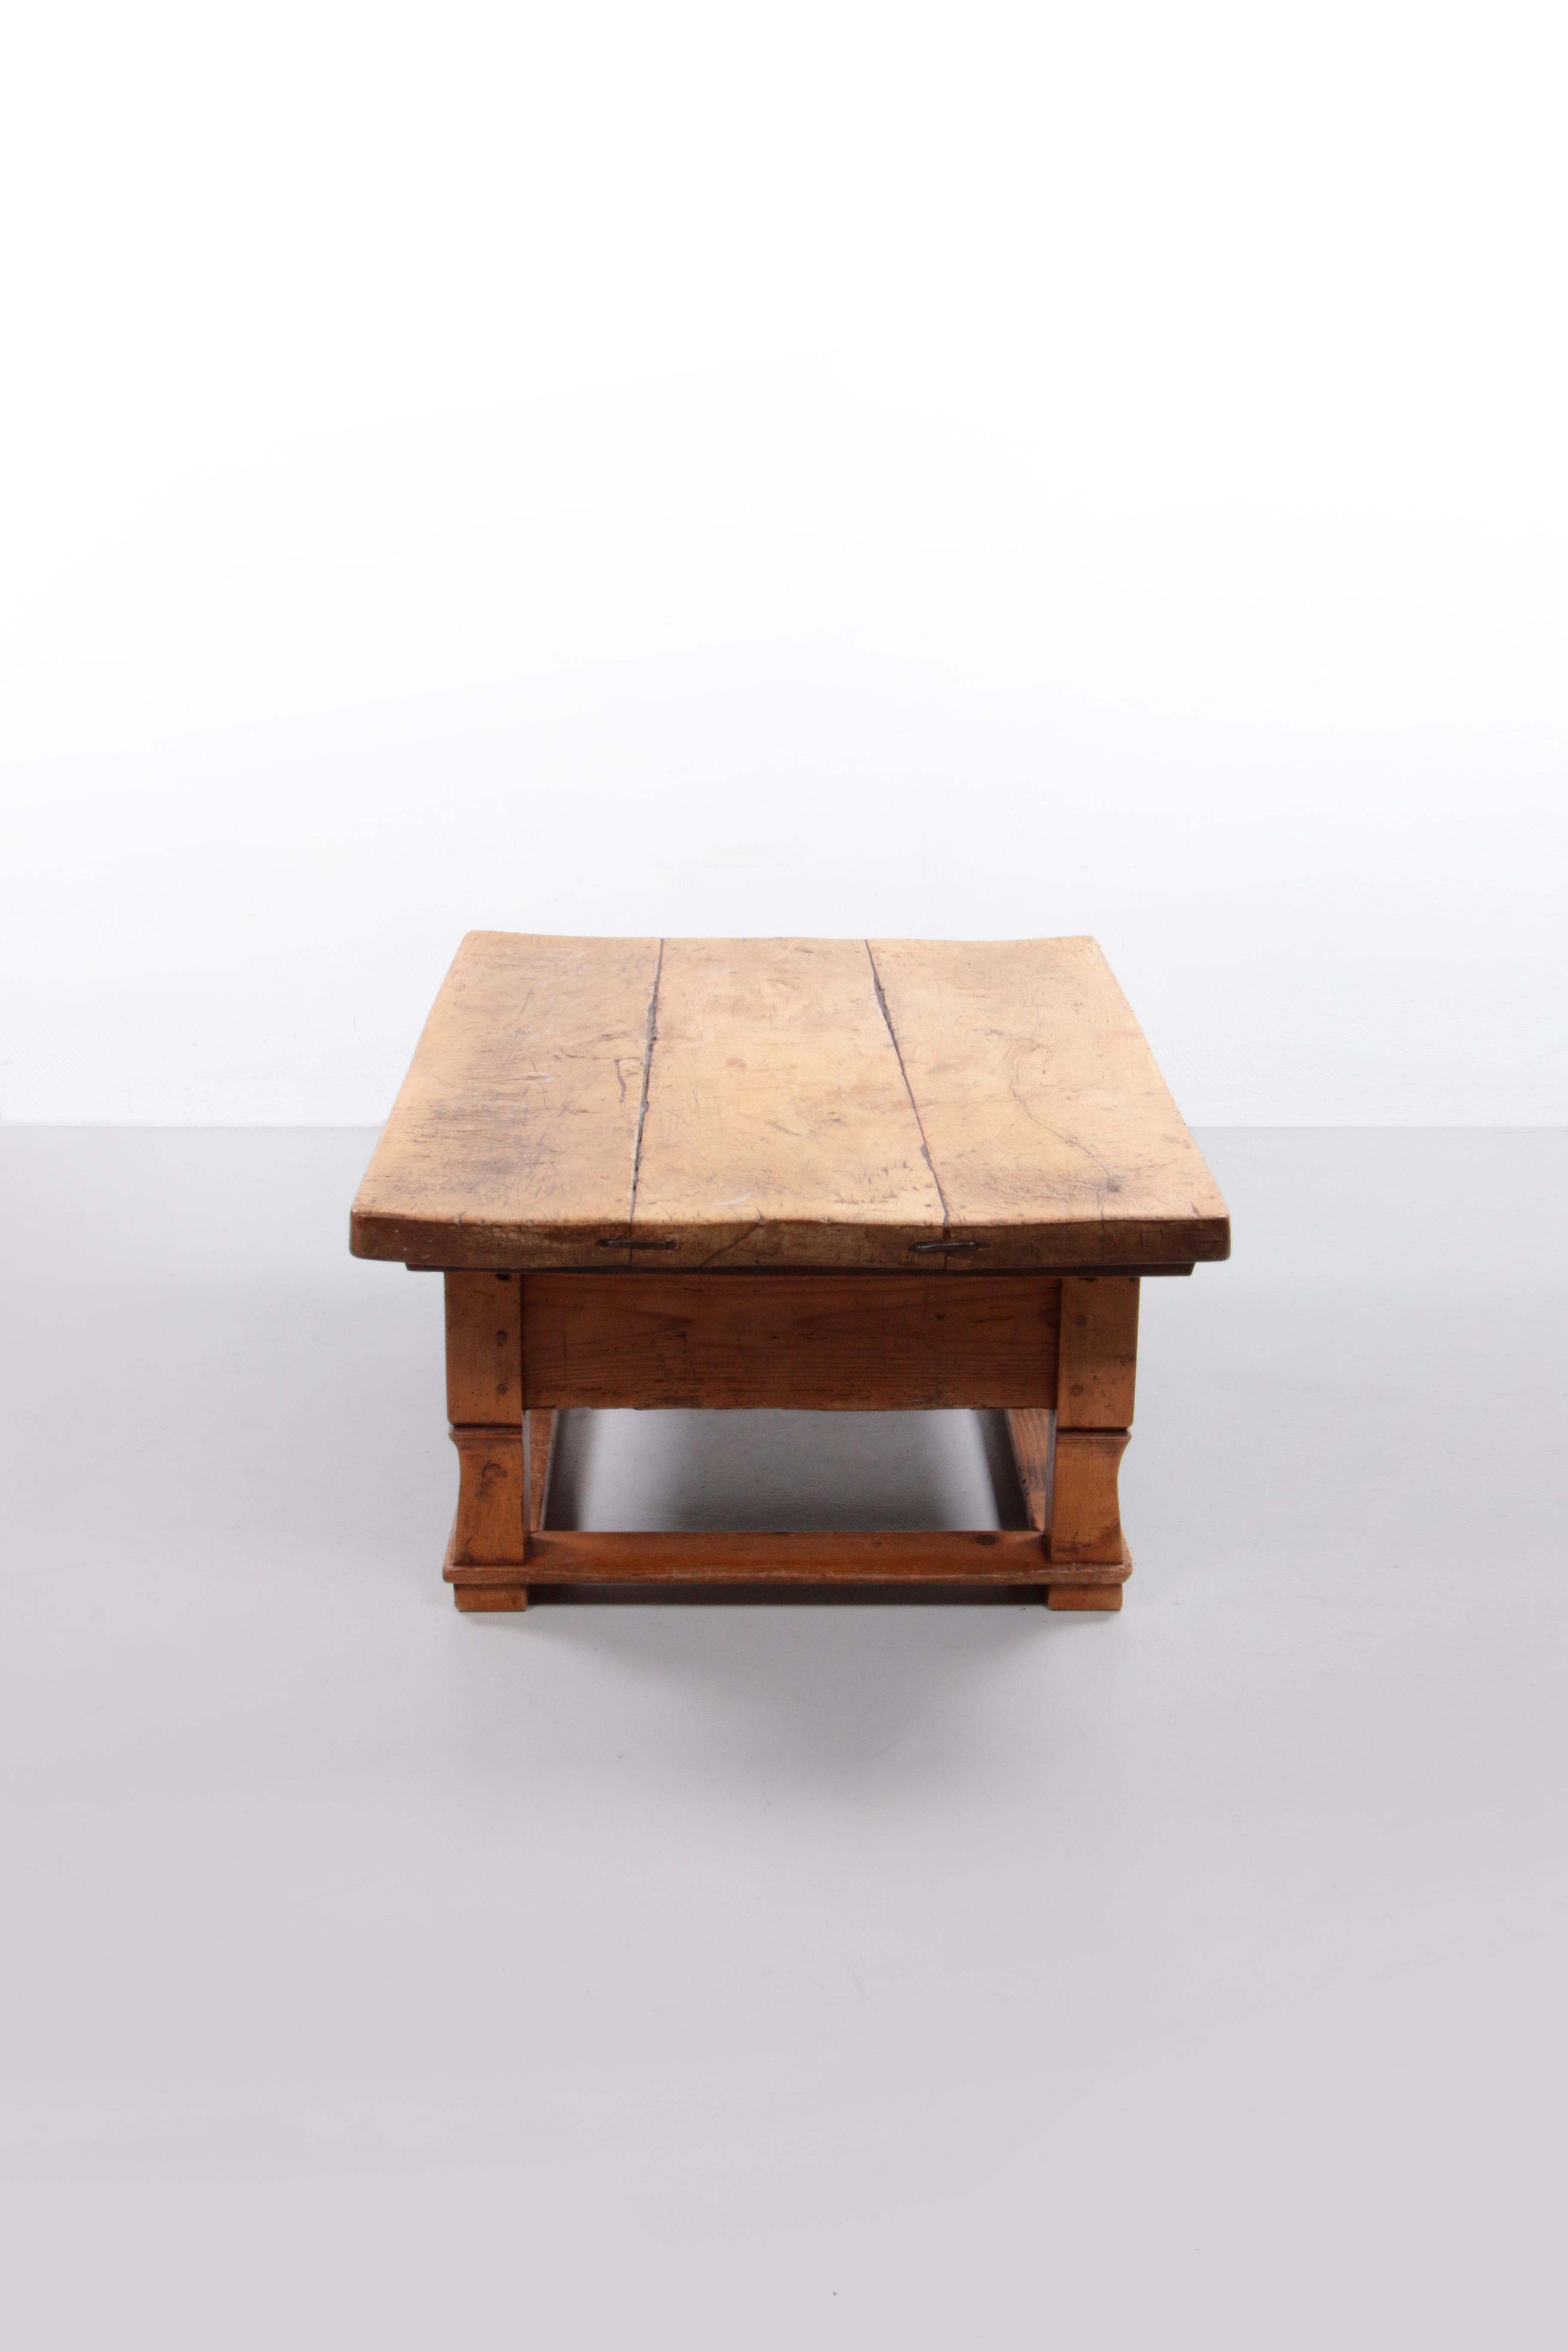 Austrian Coffee Table18- 19th Century Walnut Payment Table with Drawer, Austria In Good Condition For Sale In Oostrum-Venray, NL